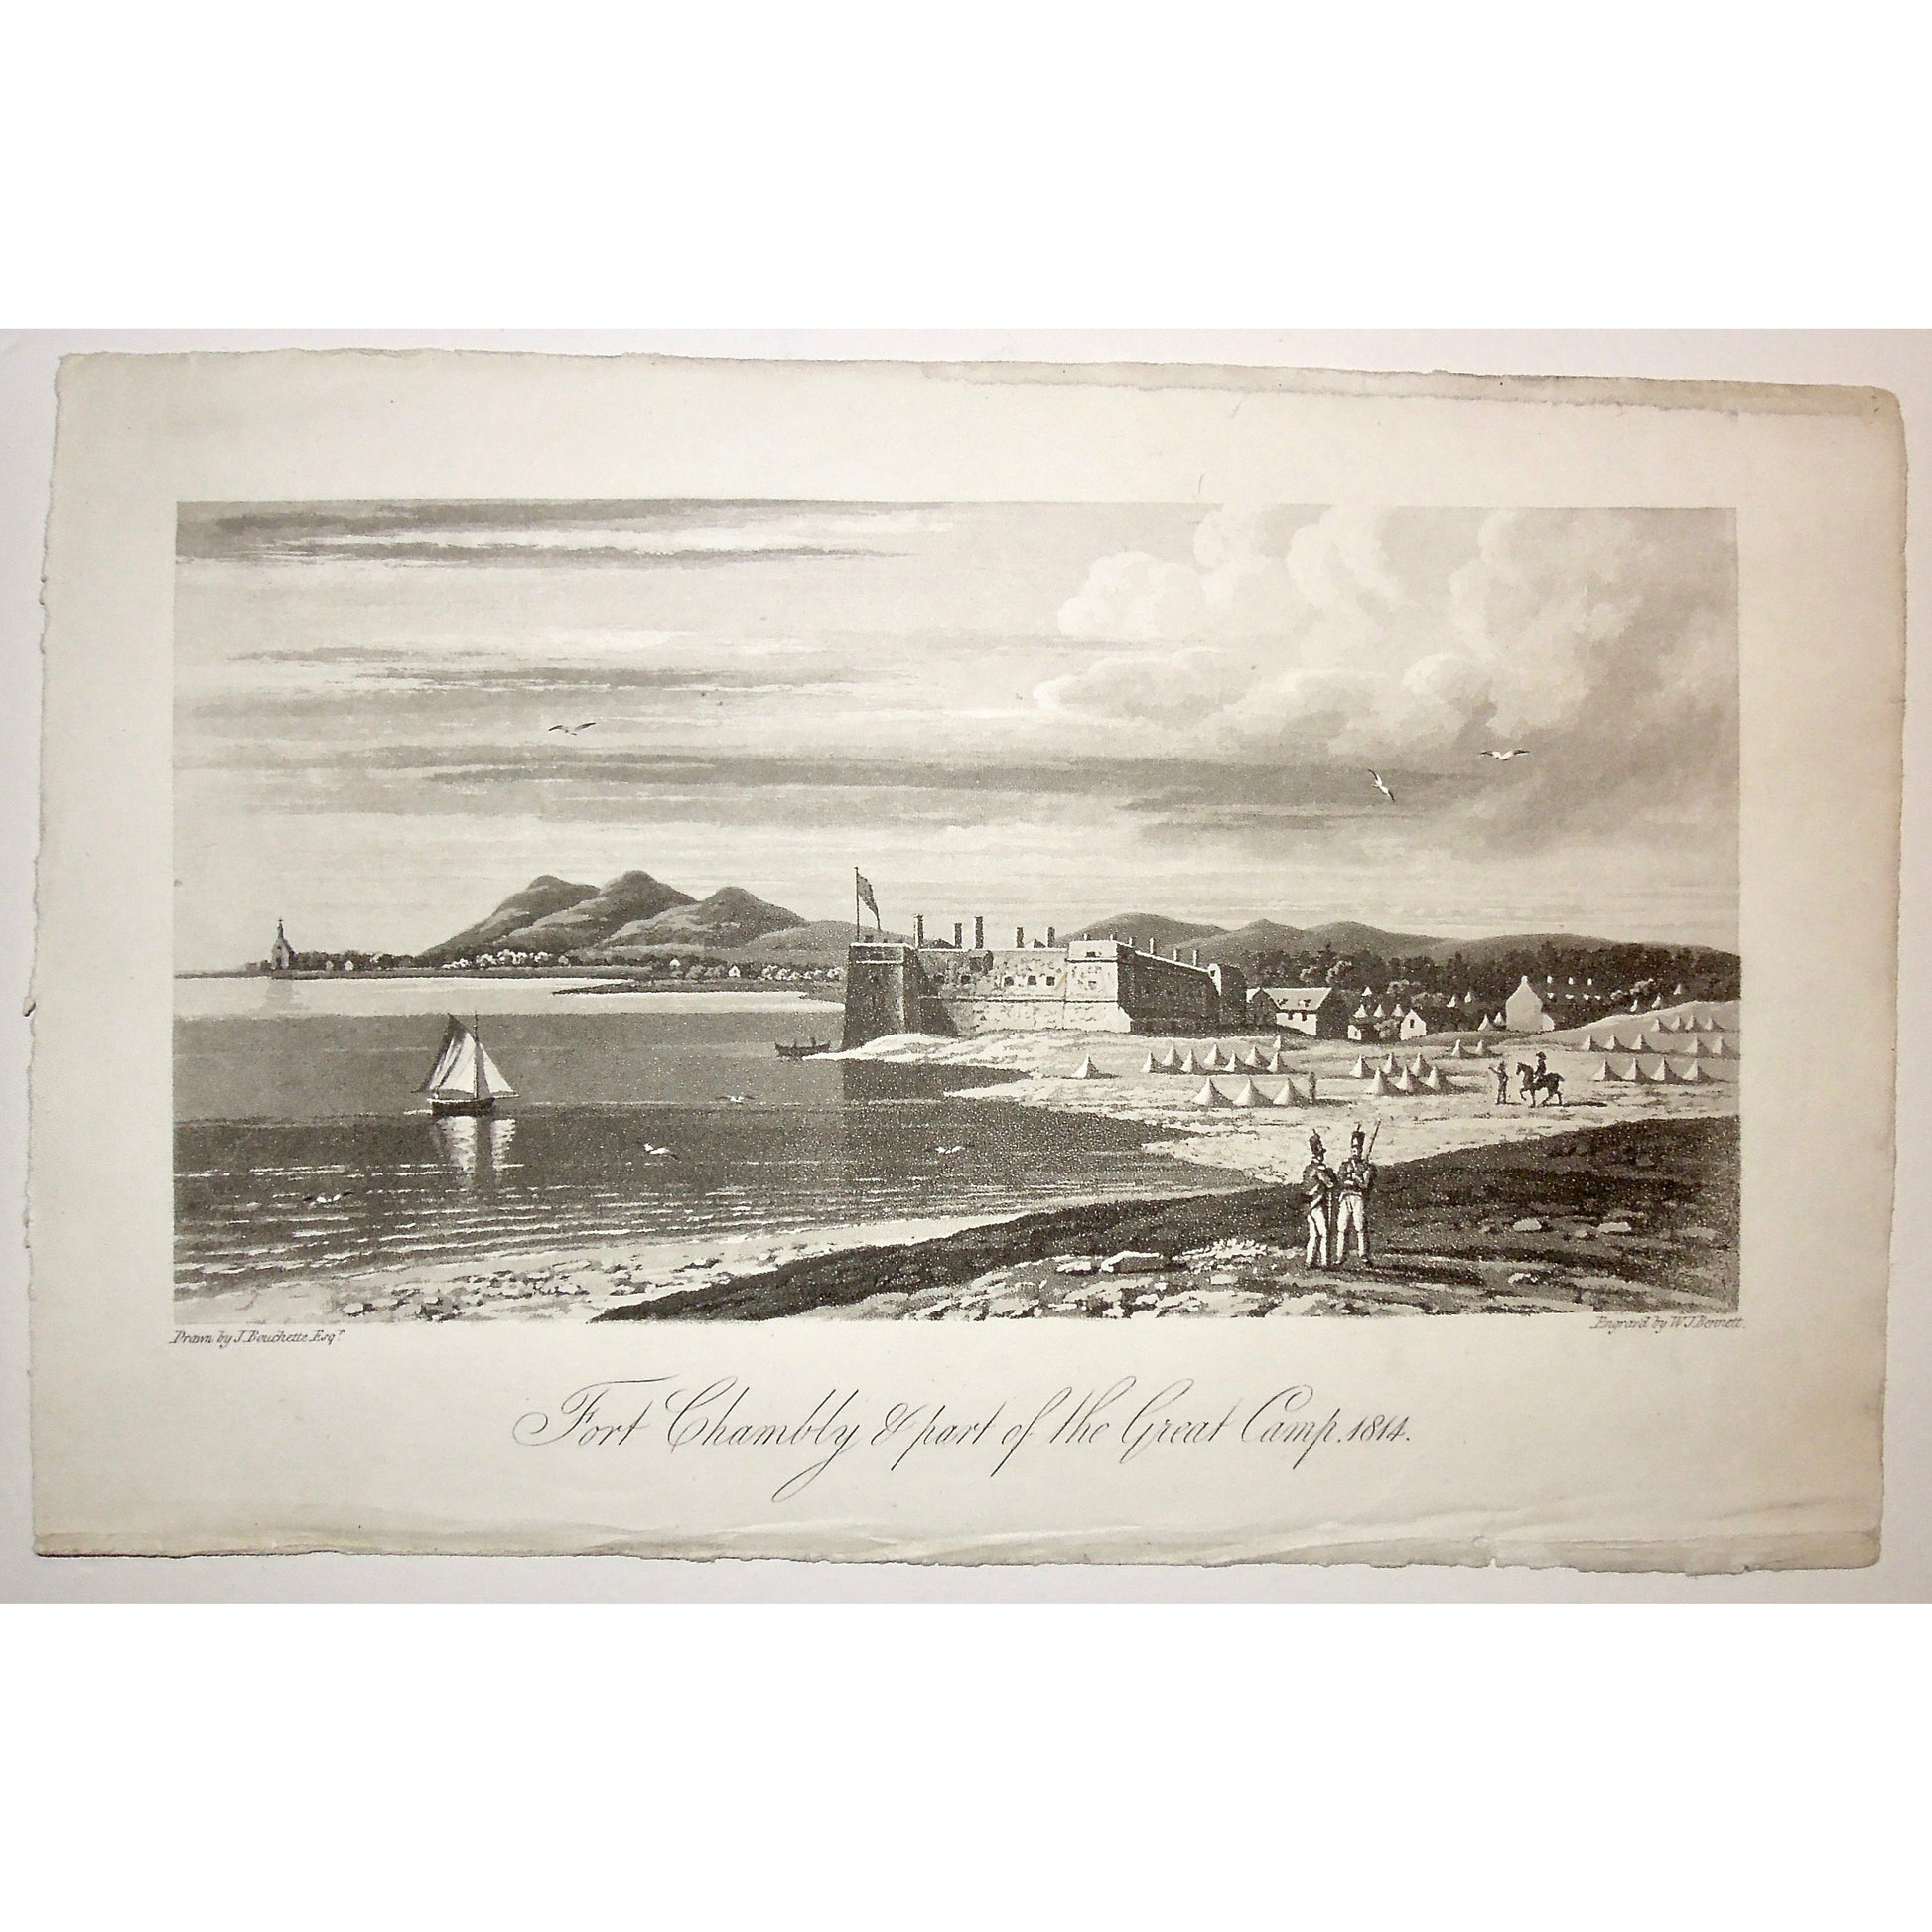 Fort Chambly, Fort, Chambly, Great Camp, 1814, Soldiers, Canadian History, Encampment, Camp, on the water, military, A Topographical Description of the Province of Lower Canada, Lower Canada, Joseph Bouchette, Bouchette, 1815, W. Faden, Faden, W. J. Bennett, Bennett, Charing Cross, London, steel engraving, black and white, Antique, Prints, Decor, Canadiana, Vintage, Art, Wall Decor, 